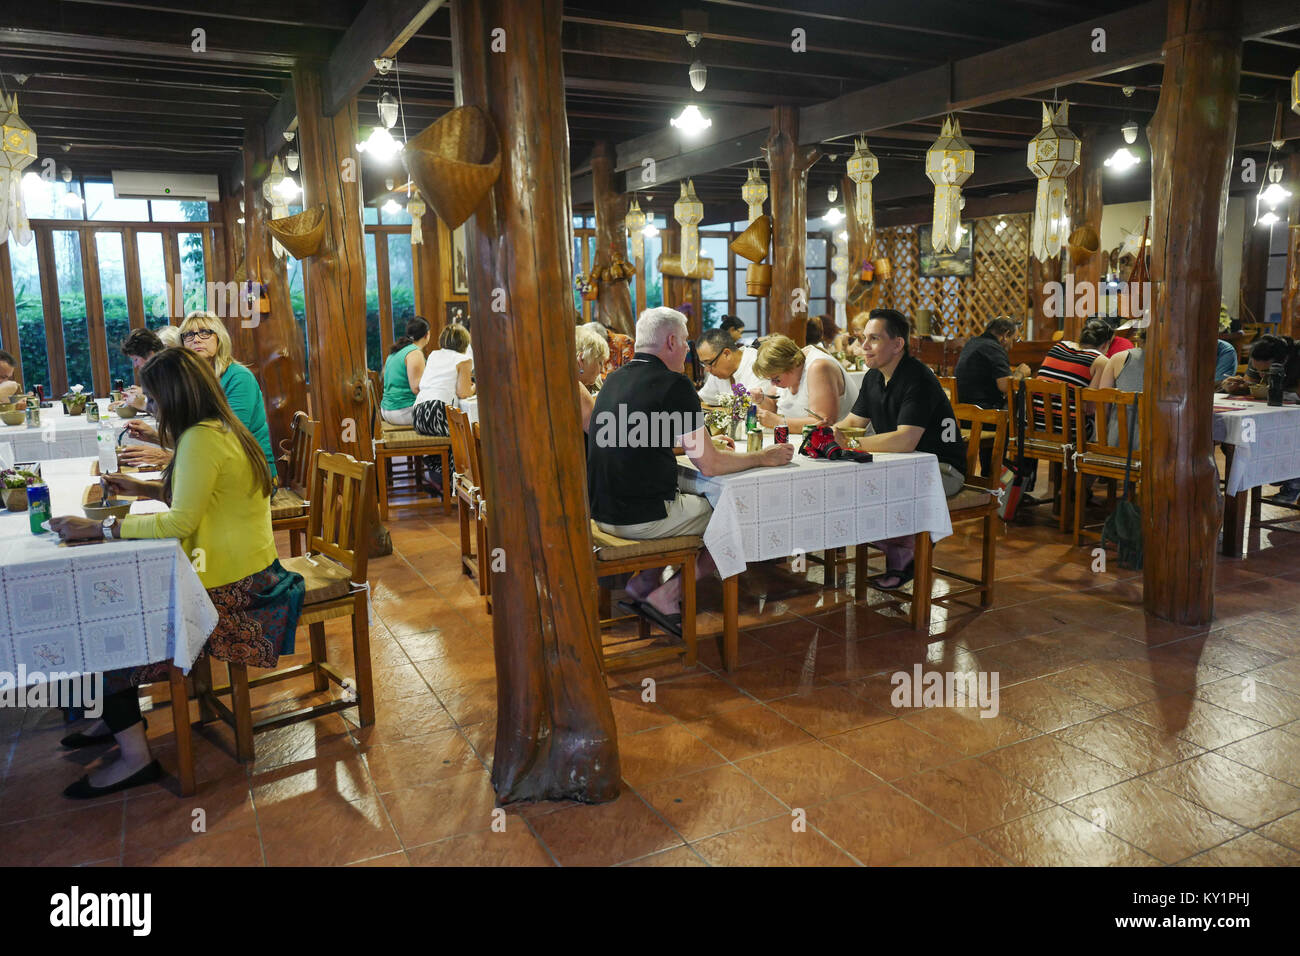 Private Up-scale restaurant in Bangkok,Thailand with American visitors Stock Photo